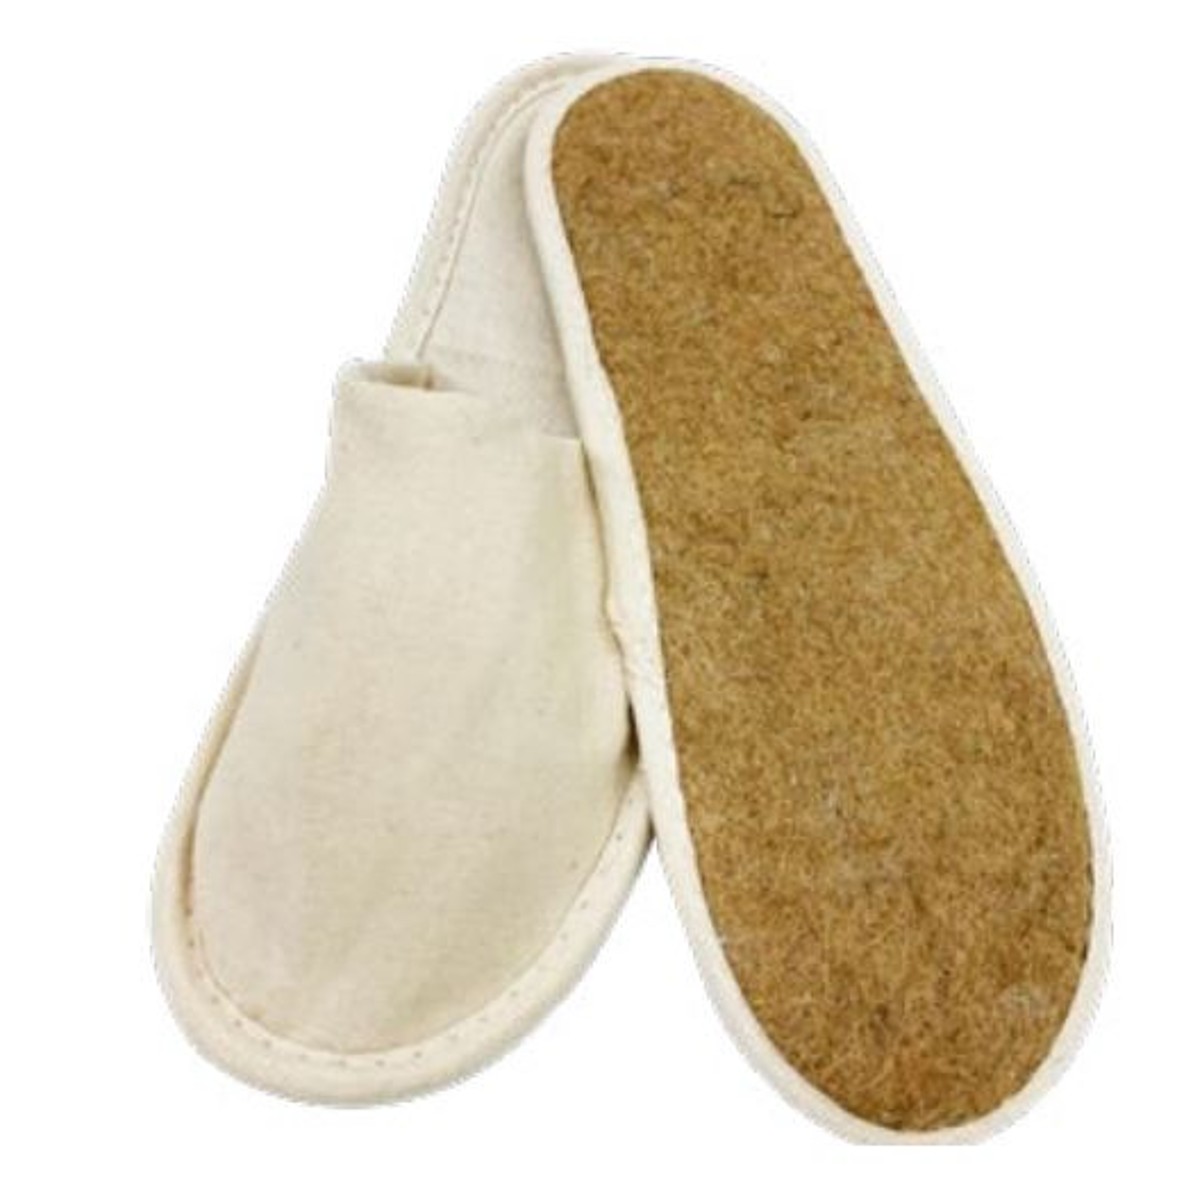 Swisstrade Bio Slippers CLOSED-Toe - available at Rapidclean